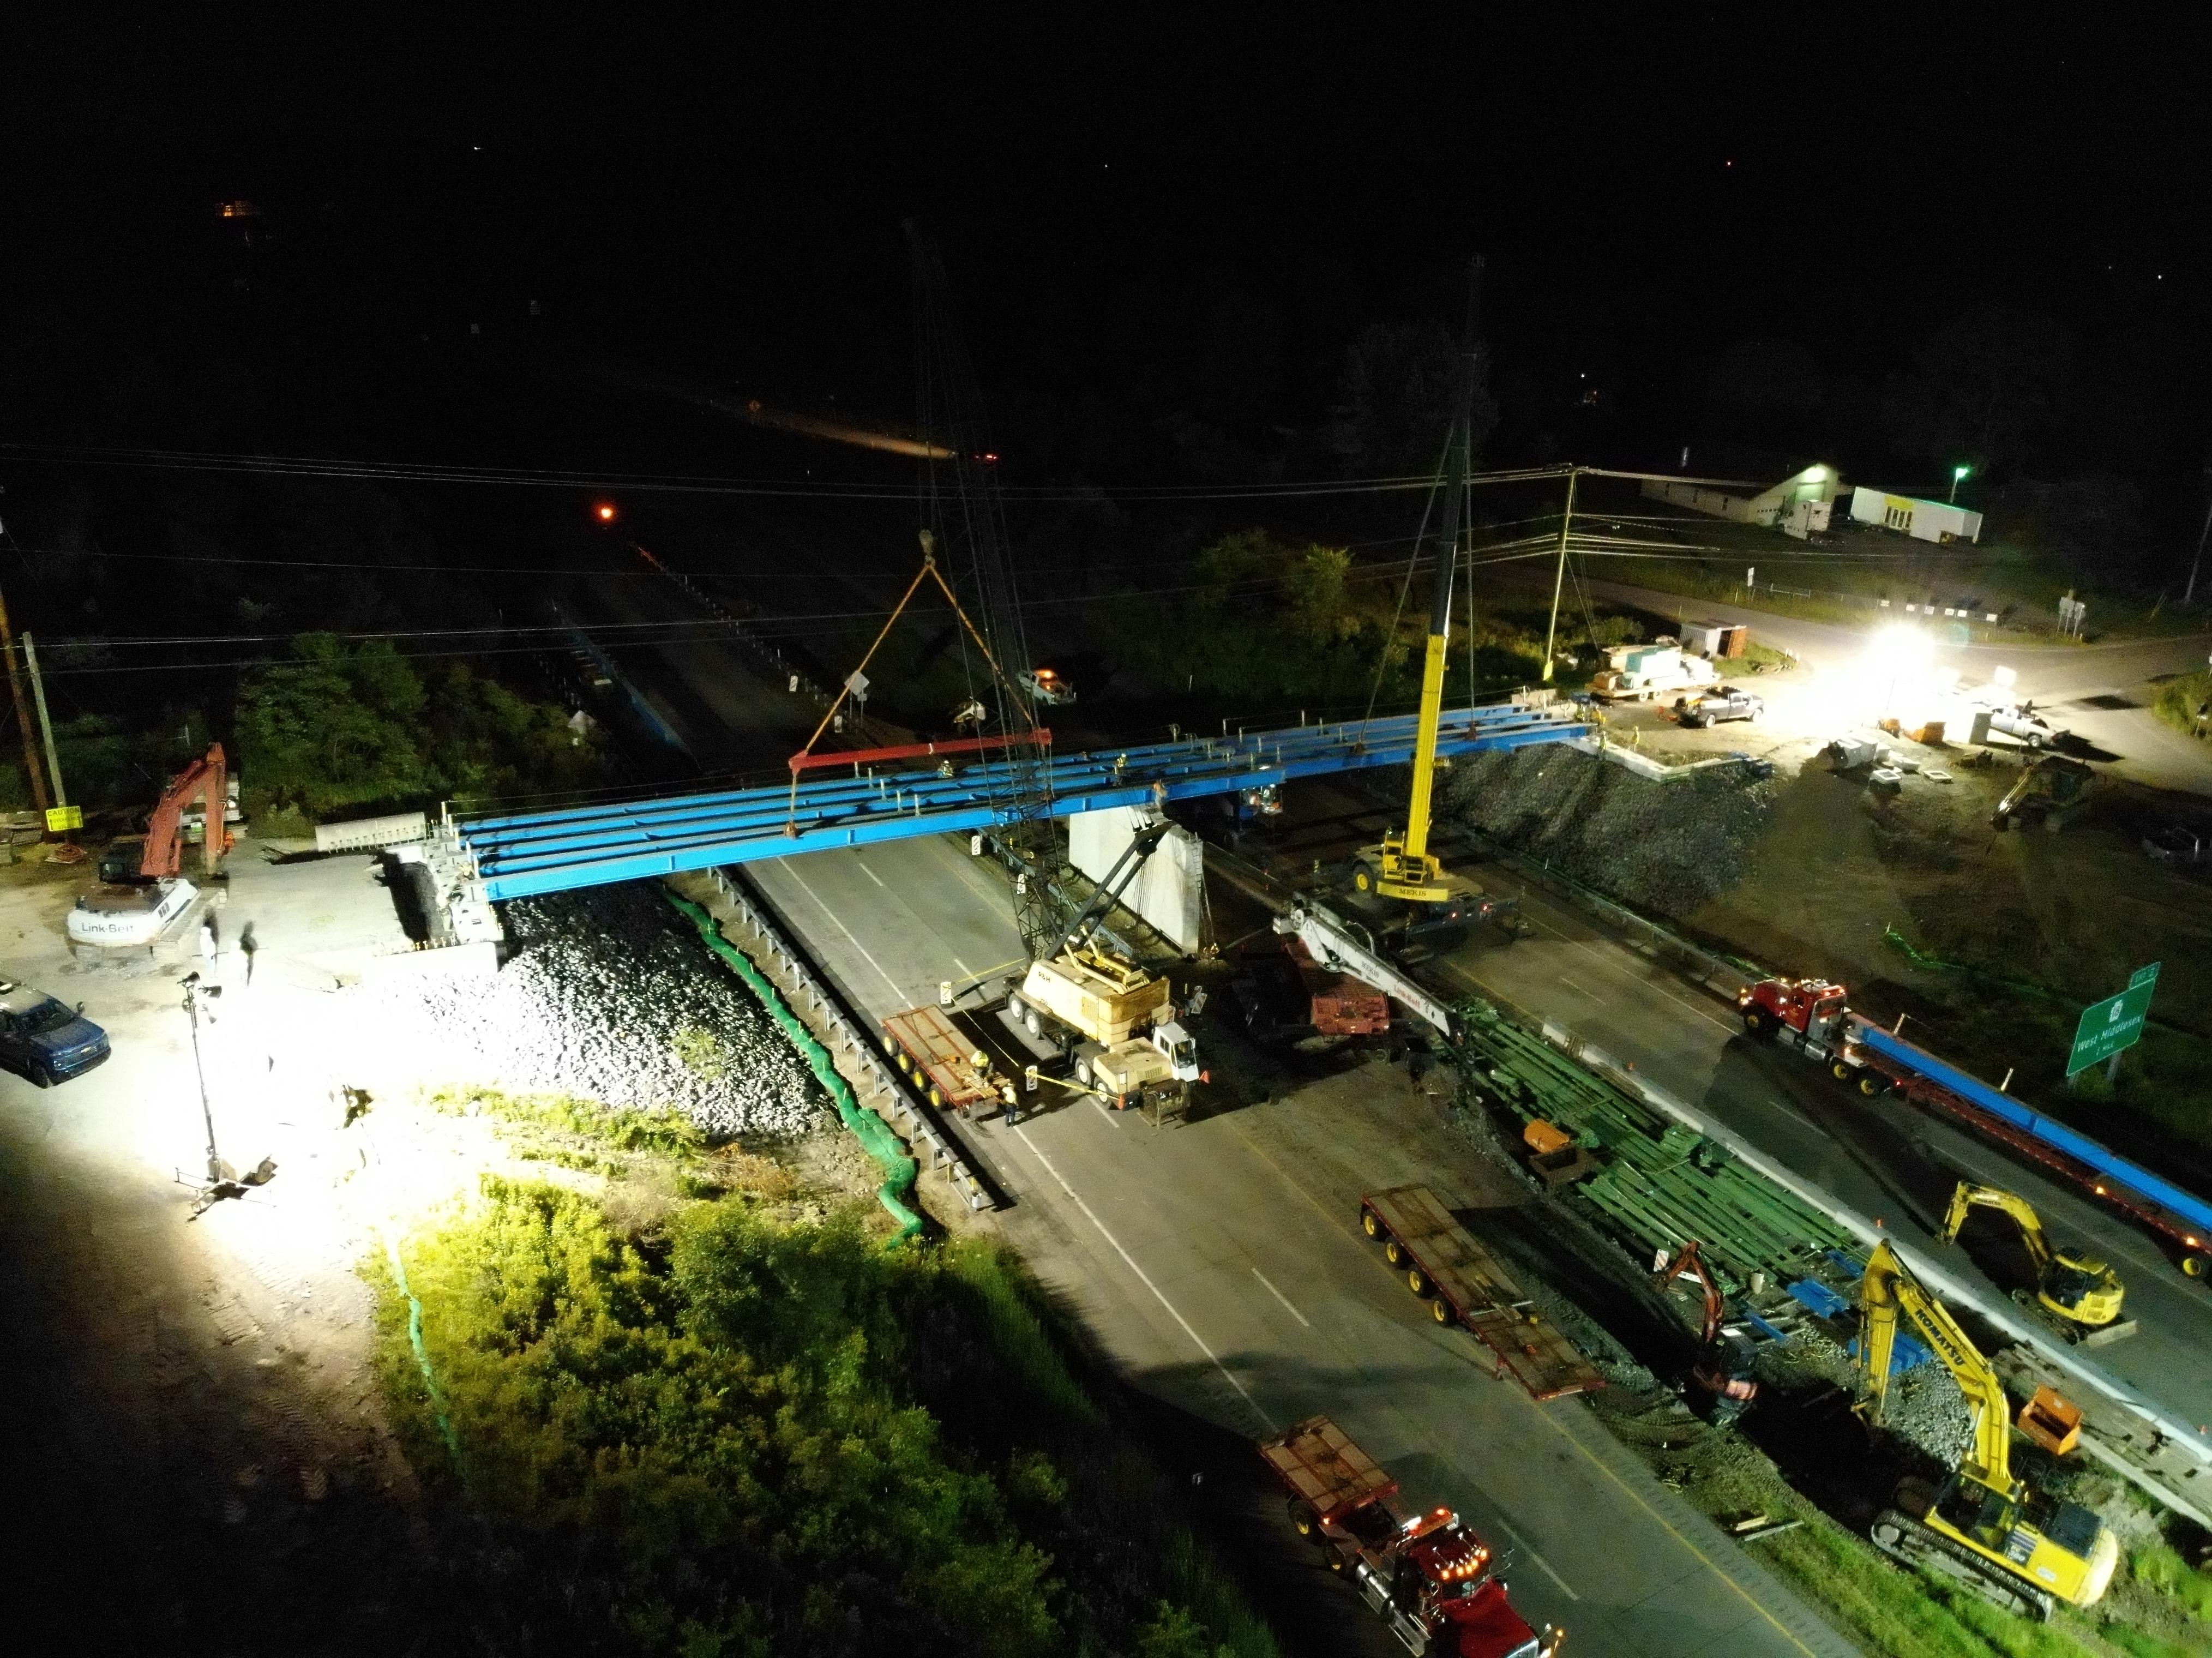 Construction crews worked overnight on June 14 into June 15 to place 7 steel beams for the new bridge carry Rt 318 over I-376